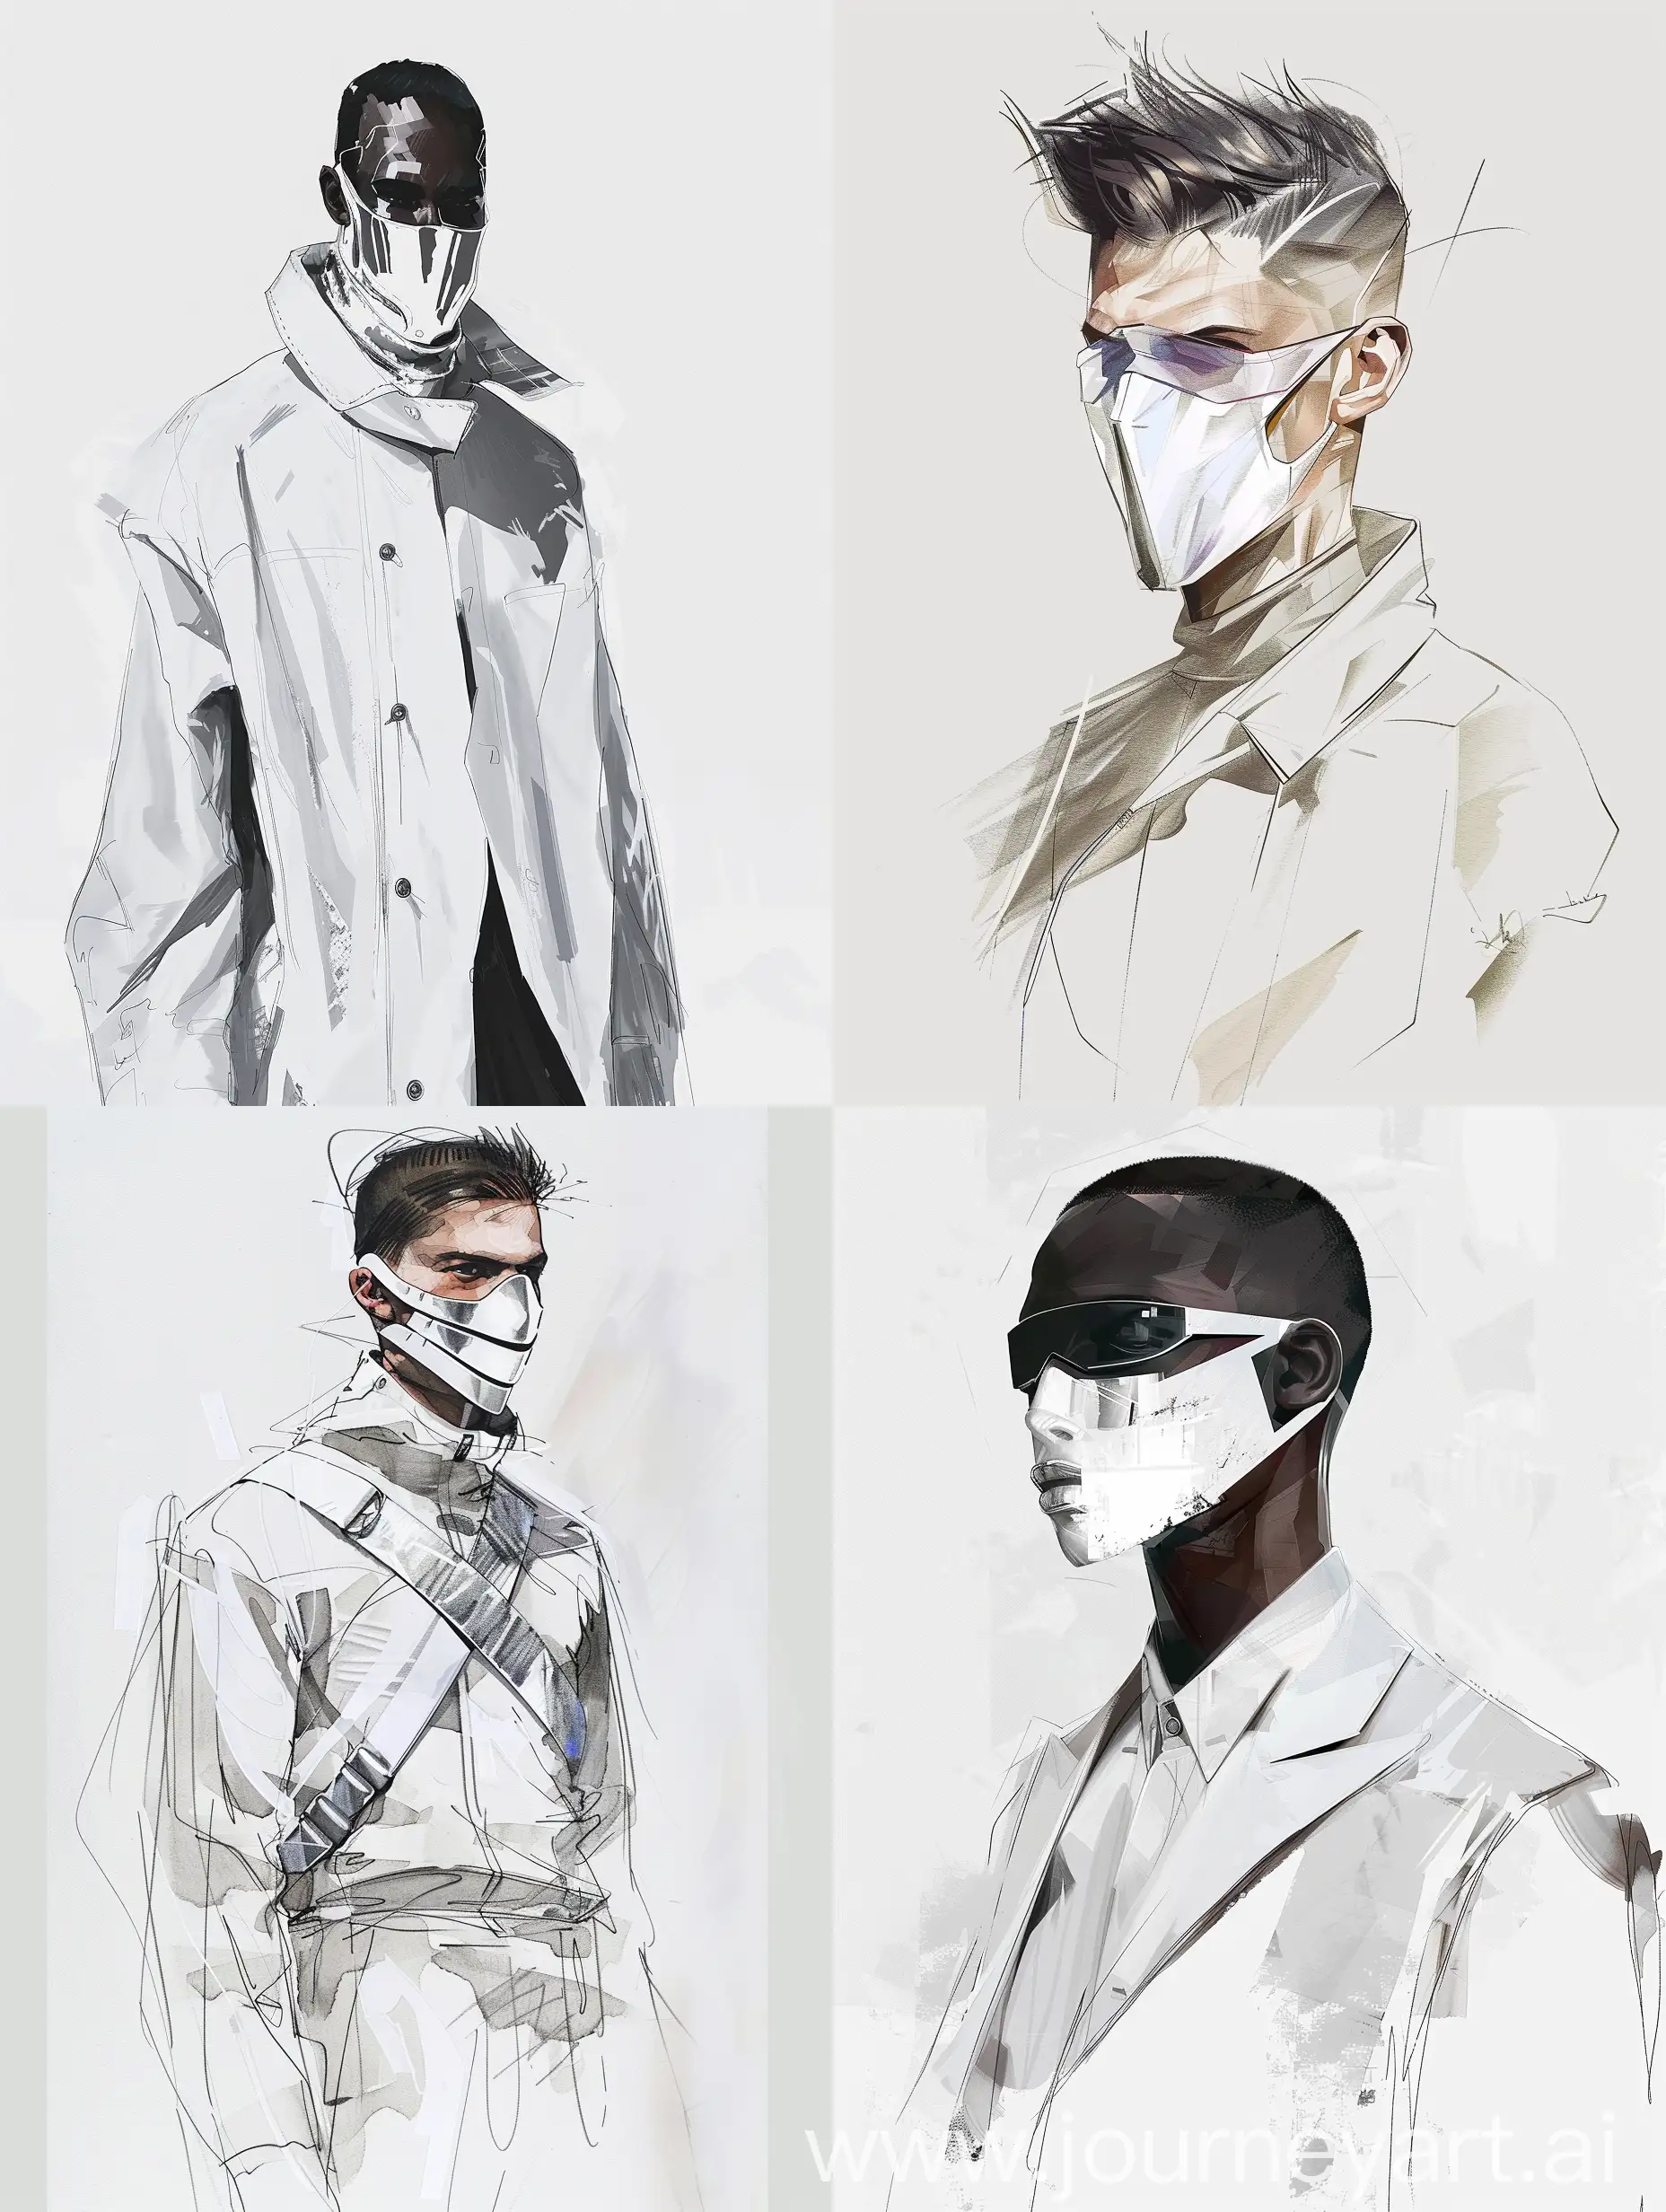 Futuristic-Male-High-Fashion-with-White-Metallic-Face-Mask-Runway-Sketches